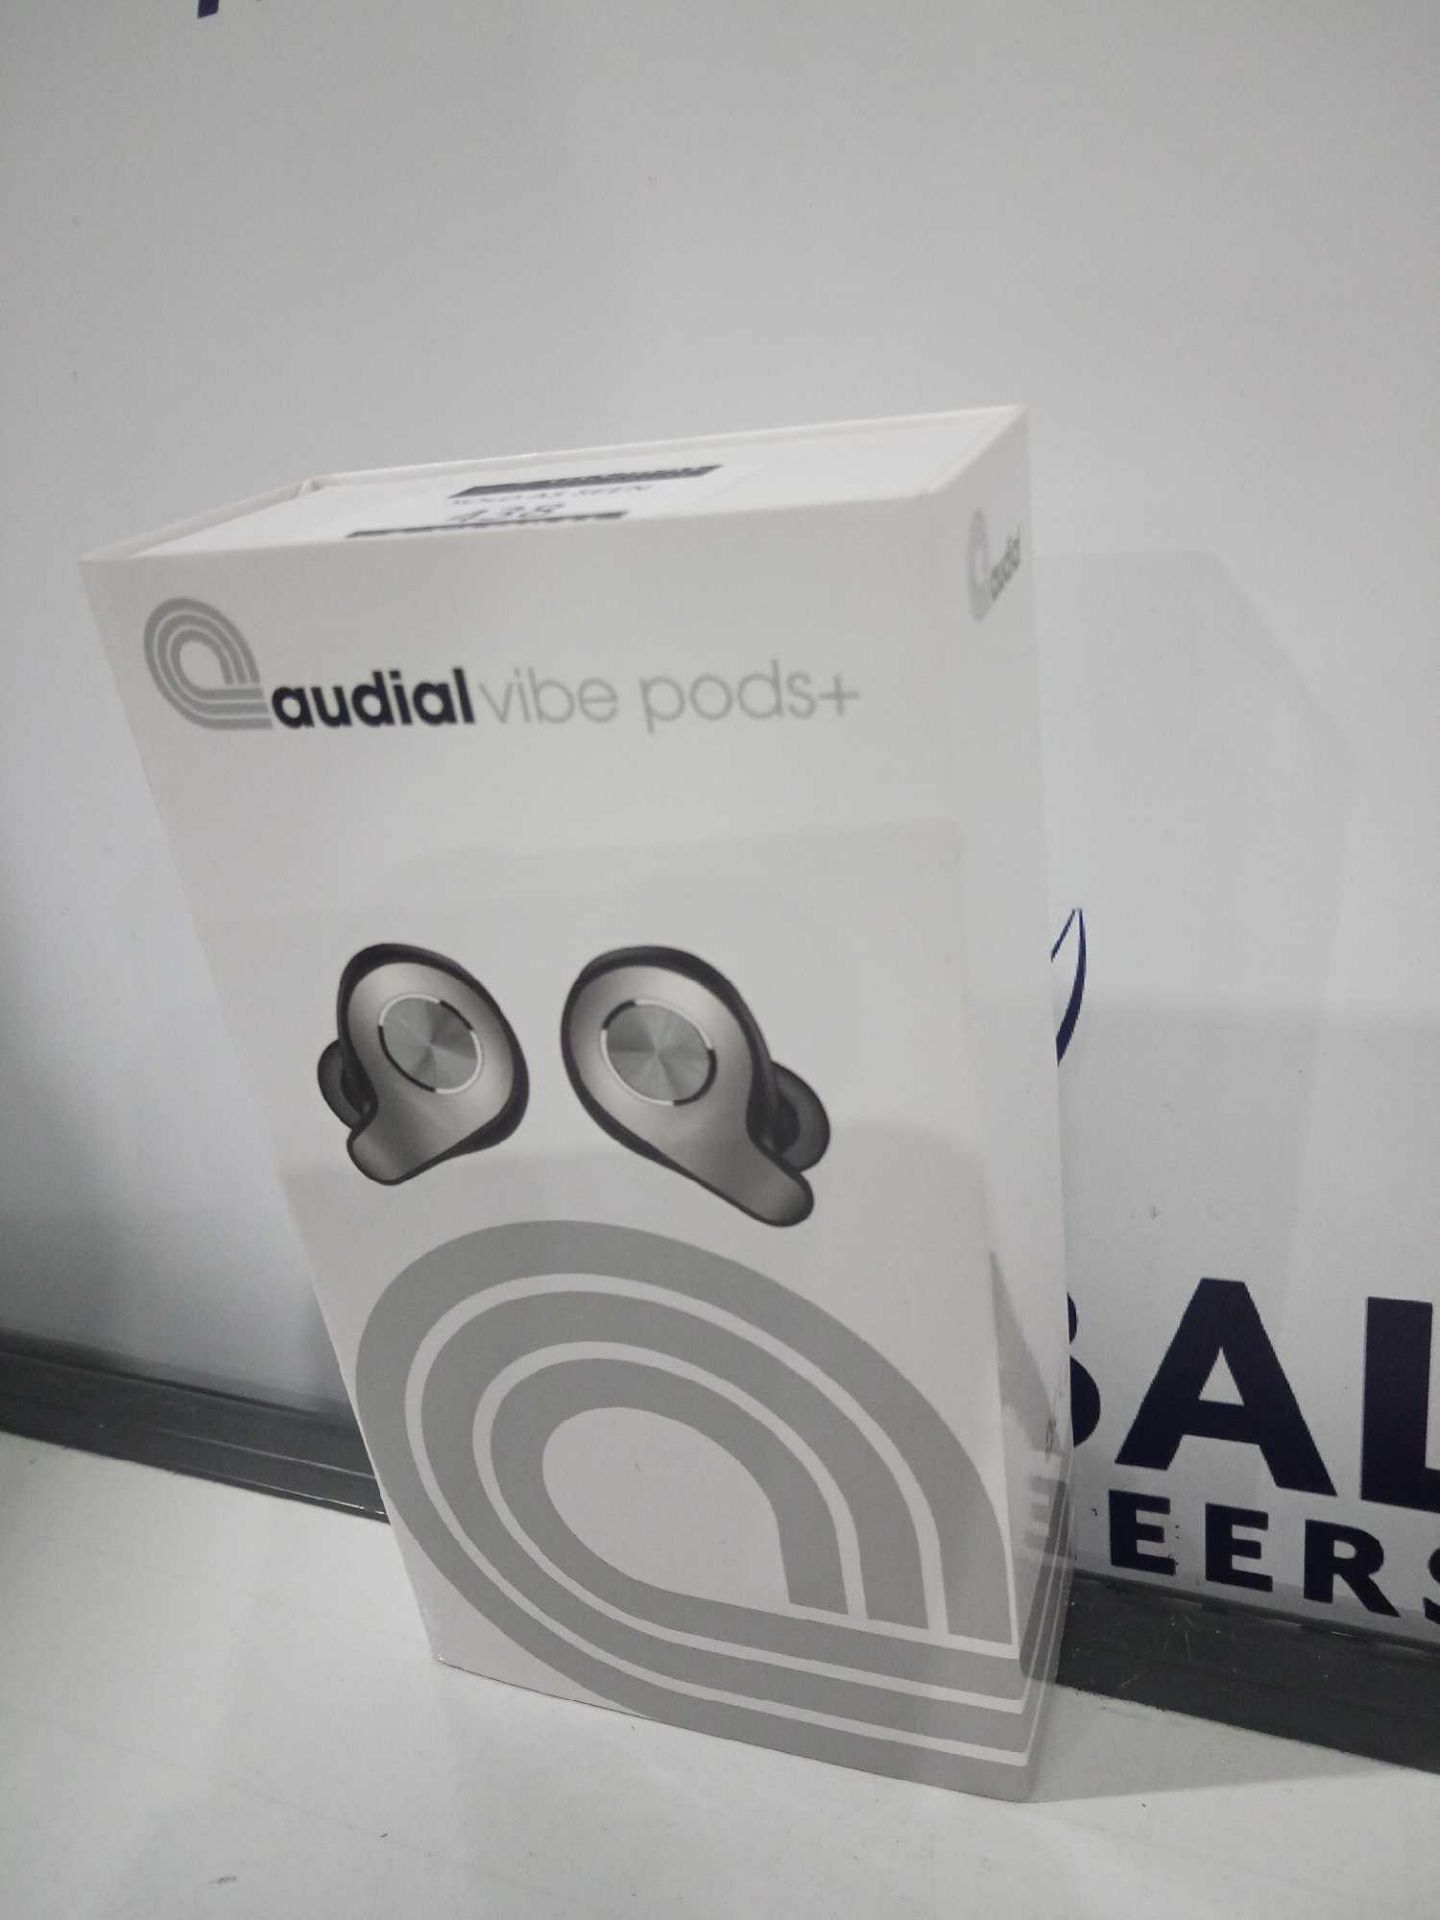 RRP £100 Boxed Audial Vibe Pods+ Ear Buds - Image 2 of 2